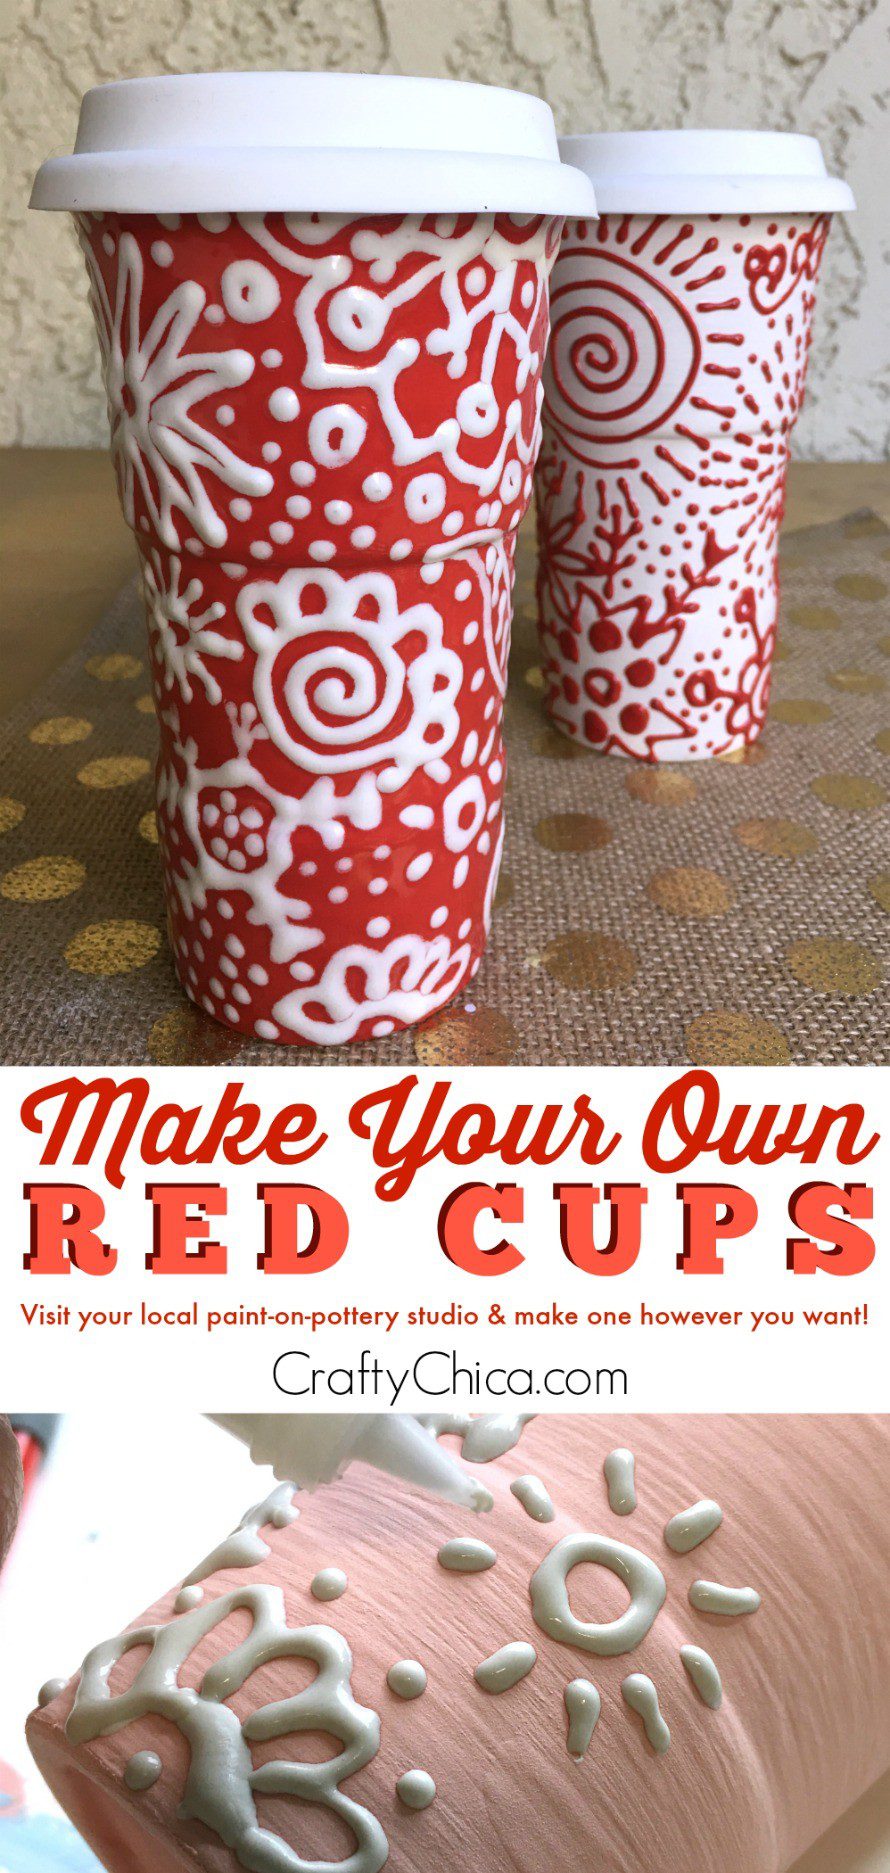 Make your own red cup CraftyChica.com